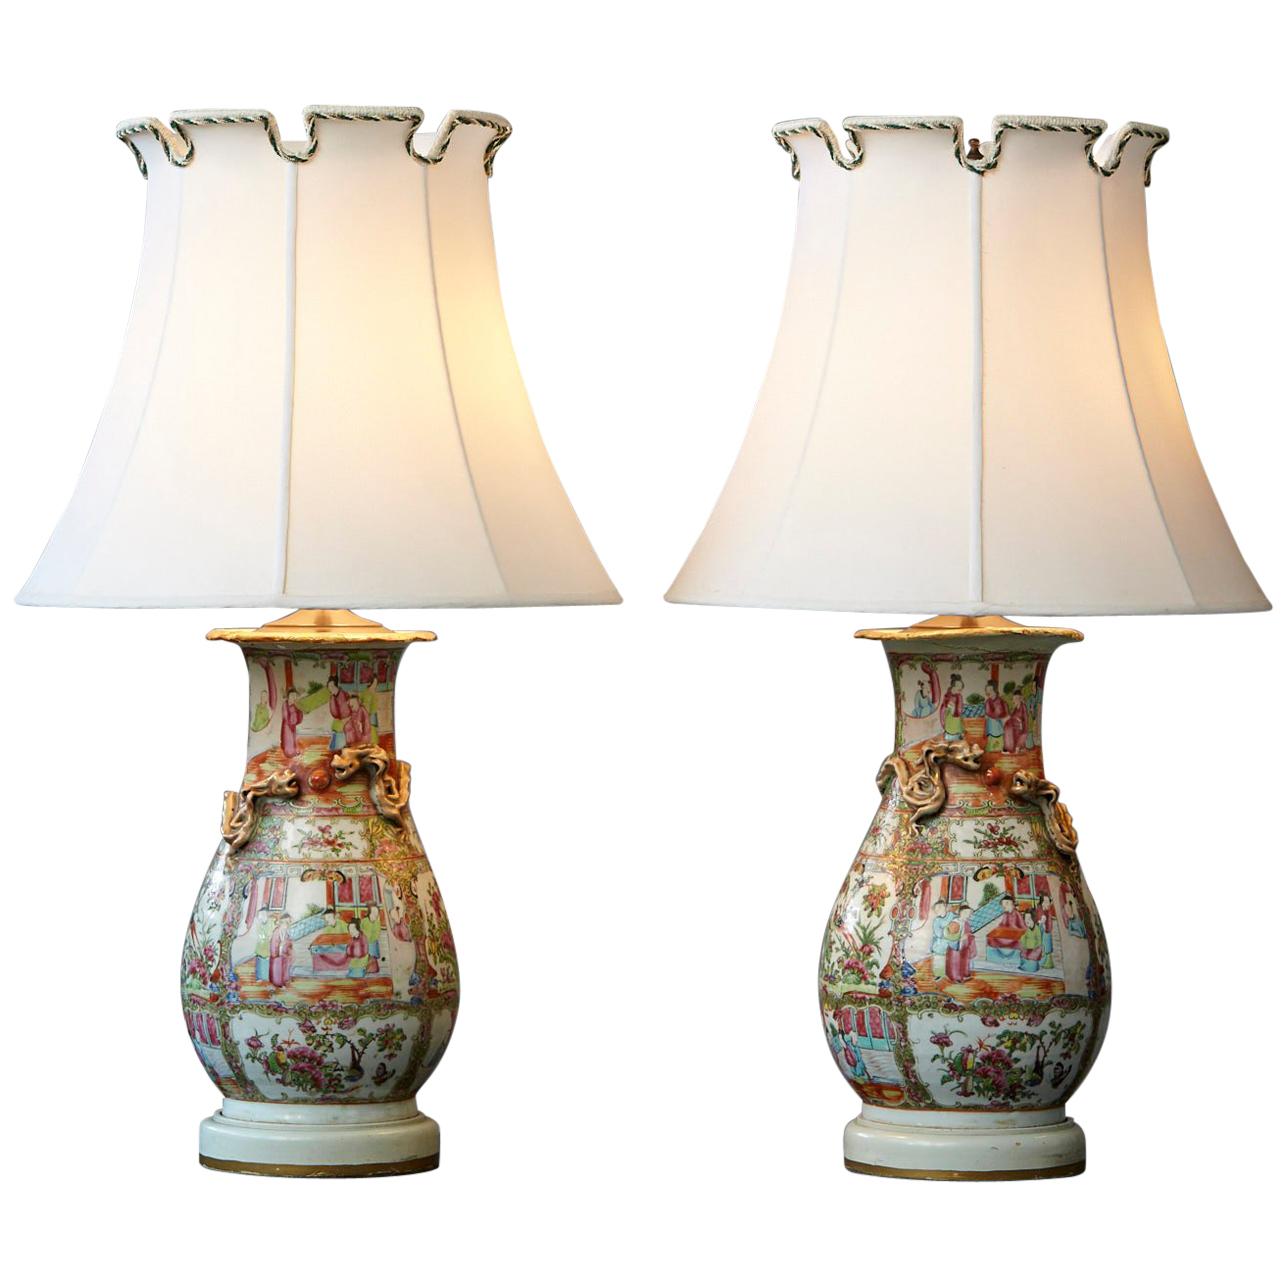 Late 19th Century Pair of Hand Painted Chinese Porcelain Vase Style Table Lamps